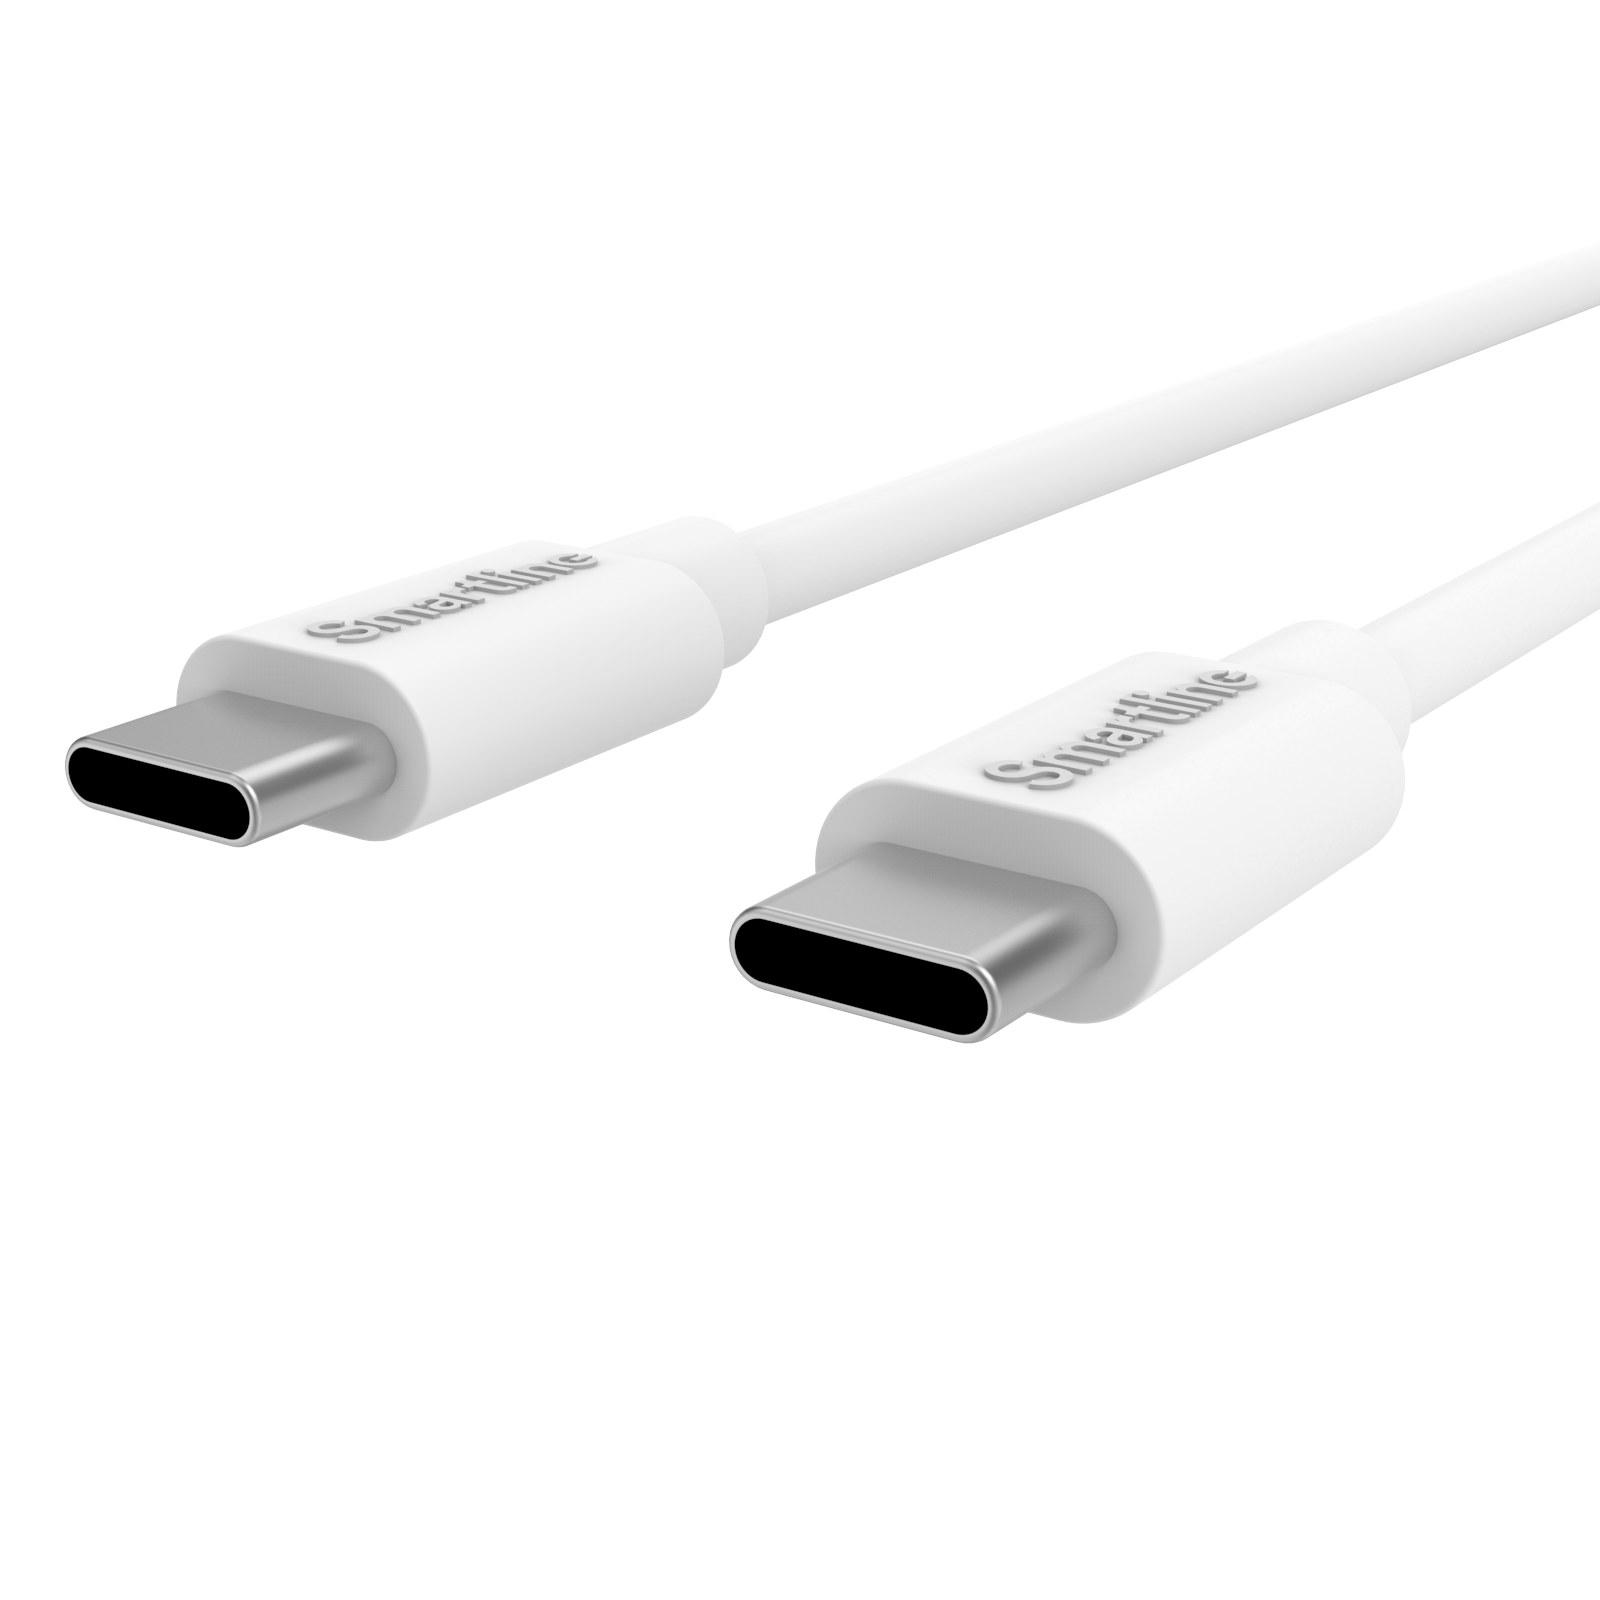 Premium Charger Samsung Galaxy S24 Plus - 2 meter Cable and Dual Wall Charger USB-C 35W